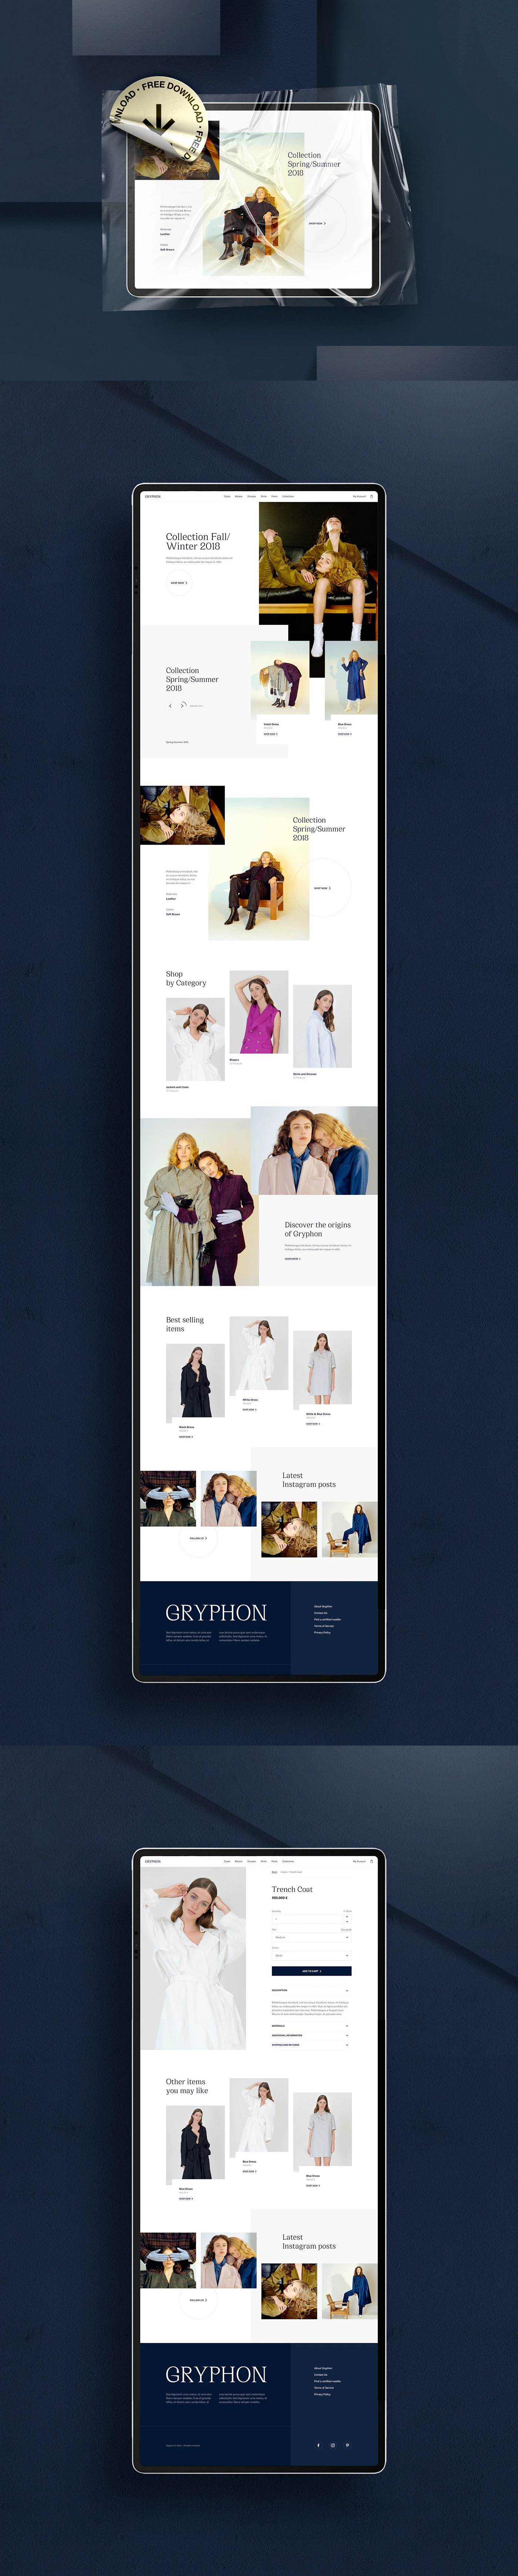 Gryphon Fashion E-commerce Template - The file is available for Sketch and performs at its best in v66.1 and newer versions. The project includes a home page and a product page designed for desktop. All the photos are from Da/Da Paris. They are not affiliated with this project, and the images are not included in the downloadable files.